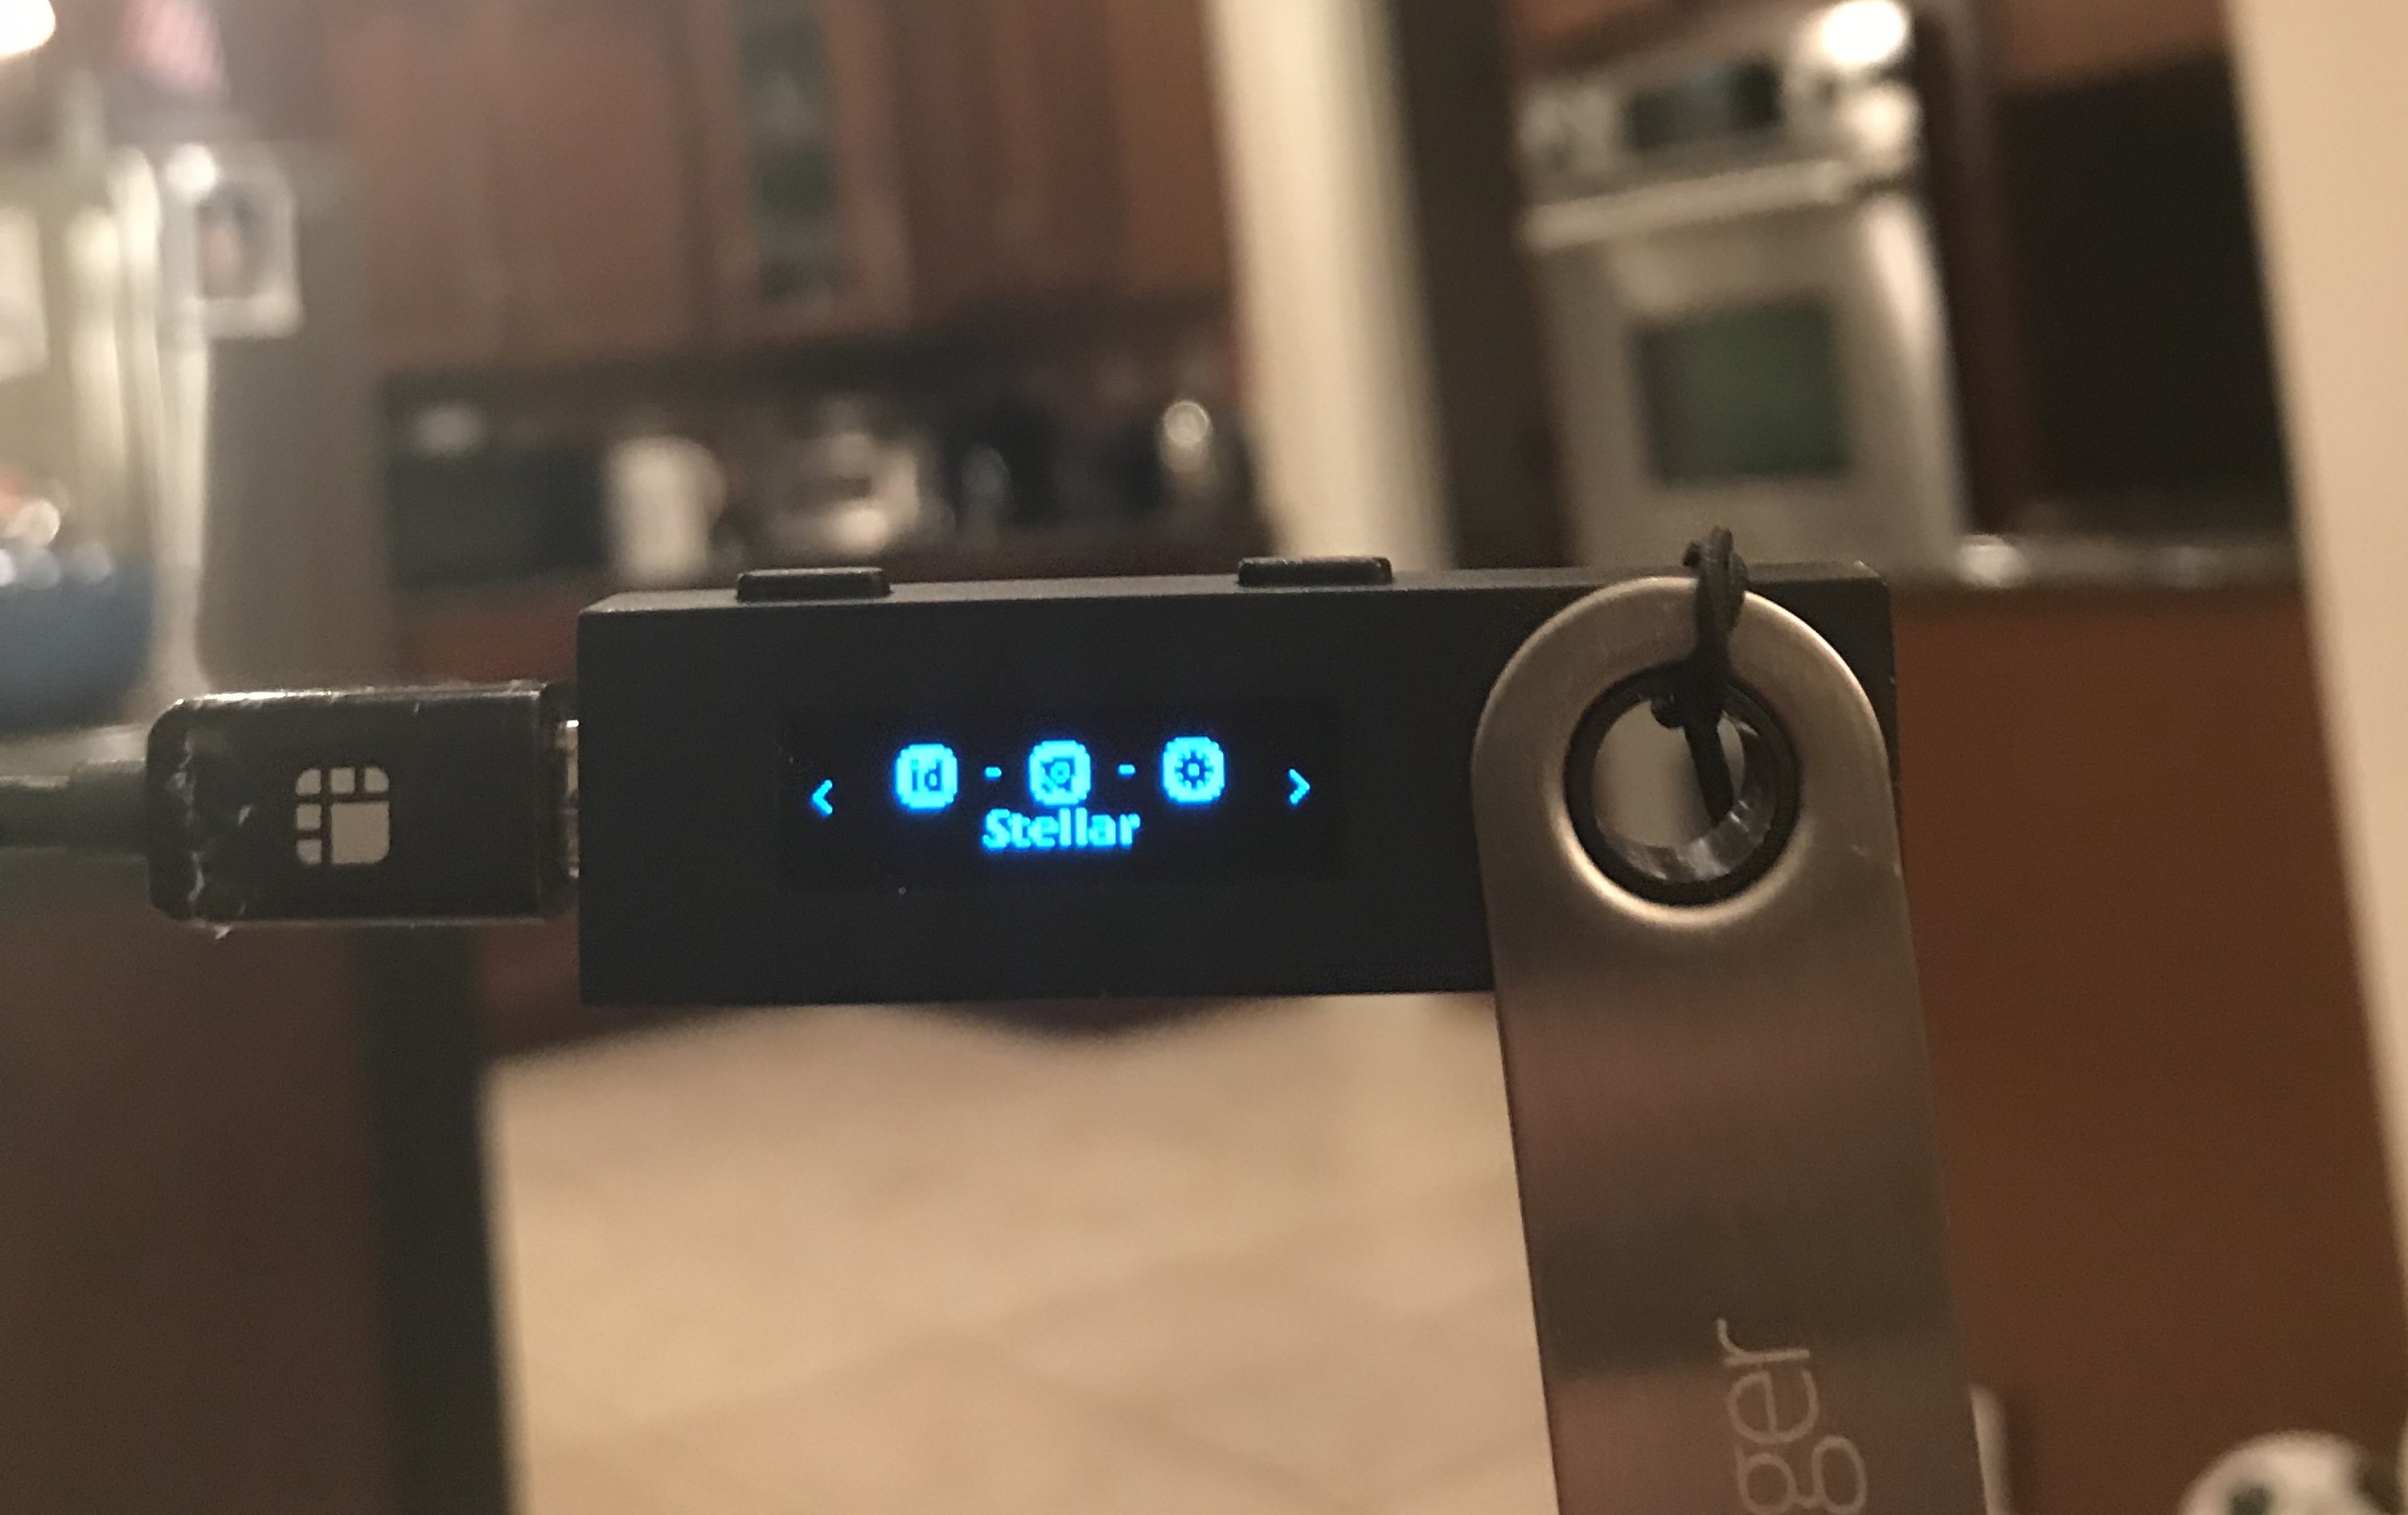 How to use Ledger Nano S Hardware Wallet - a Step-by-step Guide